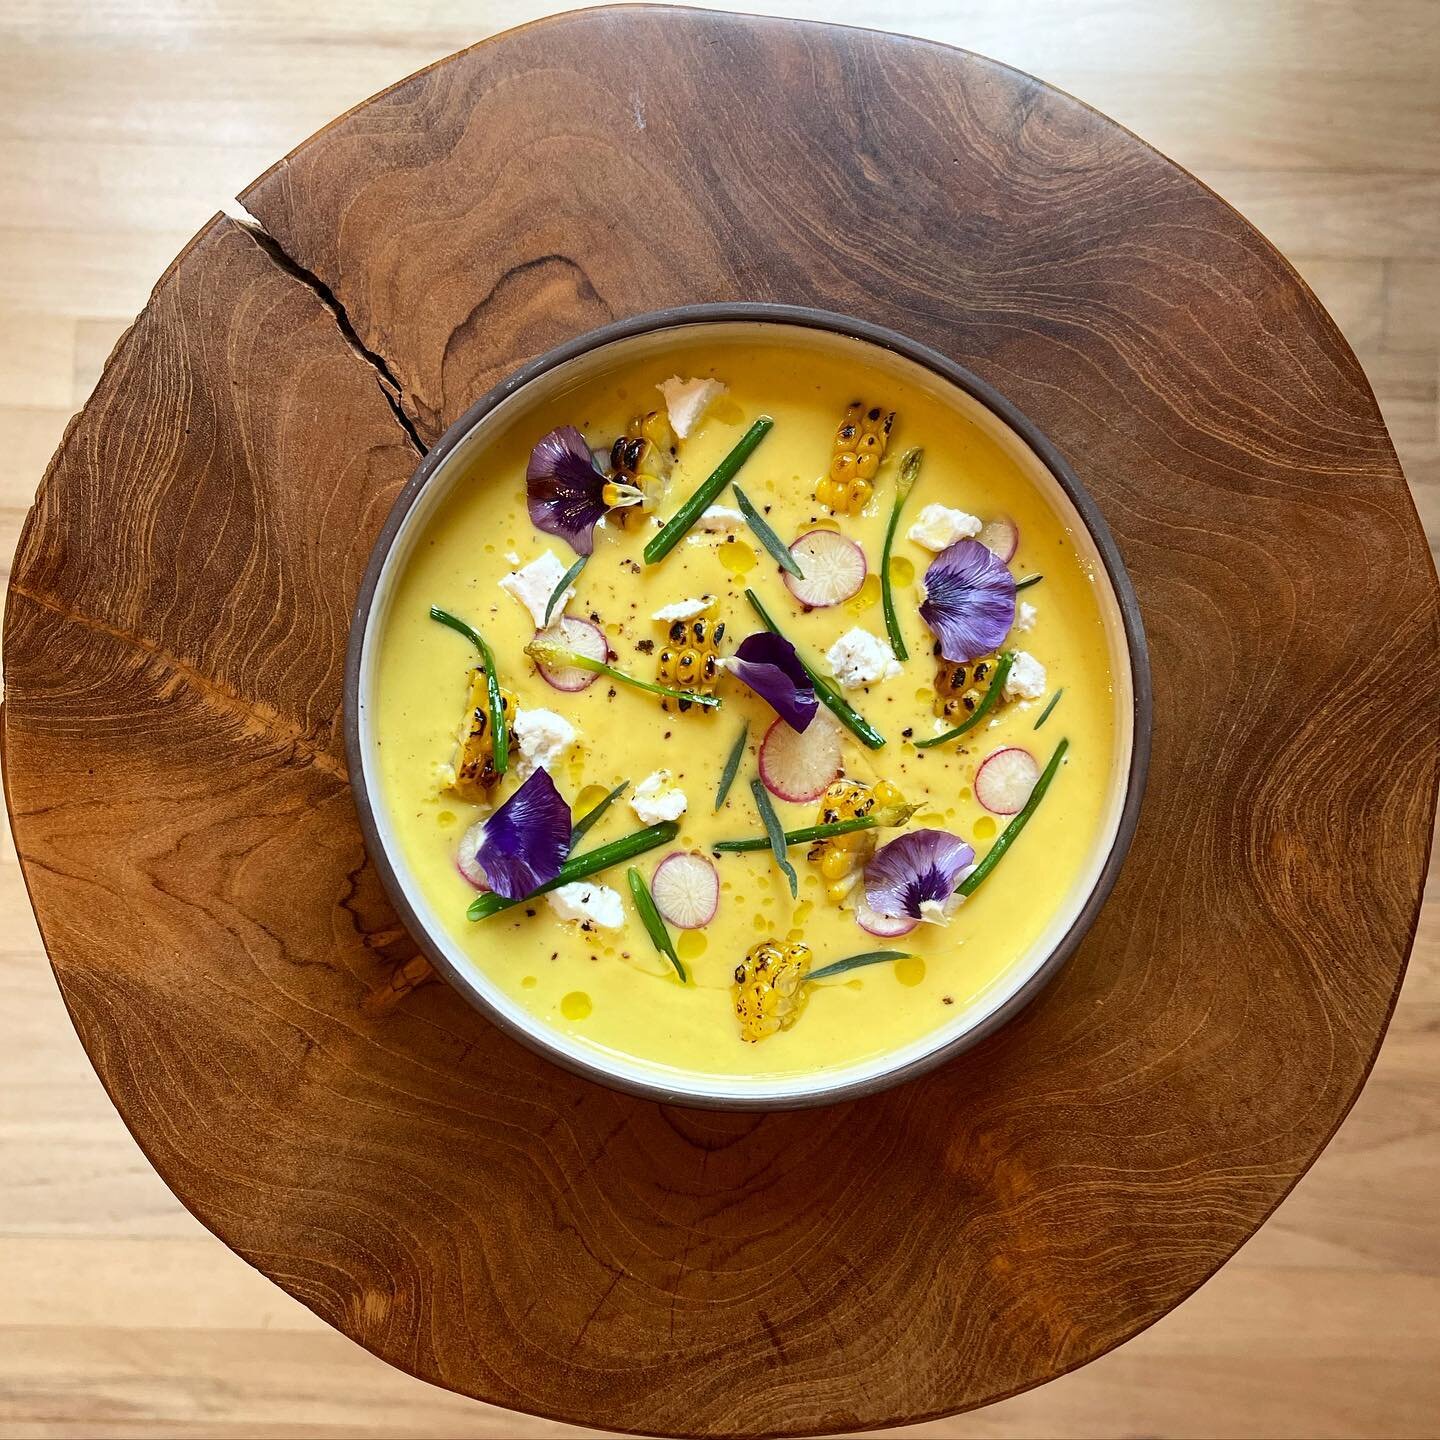 We are back! 

This weeks menu.
Pre-order your dinner for two for Wednesday and Thursday delivery. Click reserve in our bio.

App
Chilled Corn Soup
charred corn, caprino cheese, budding chives 

Main
Porchetta 
Roasted haluka heritage pork belly, pic